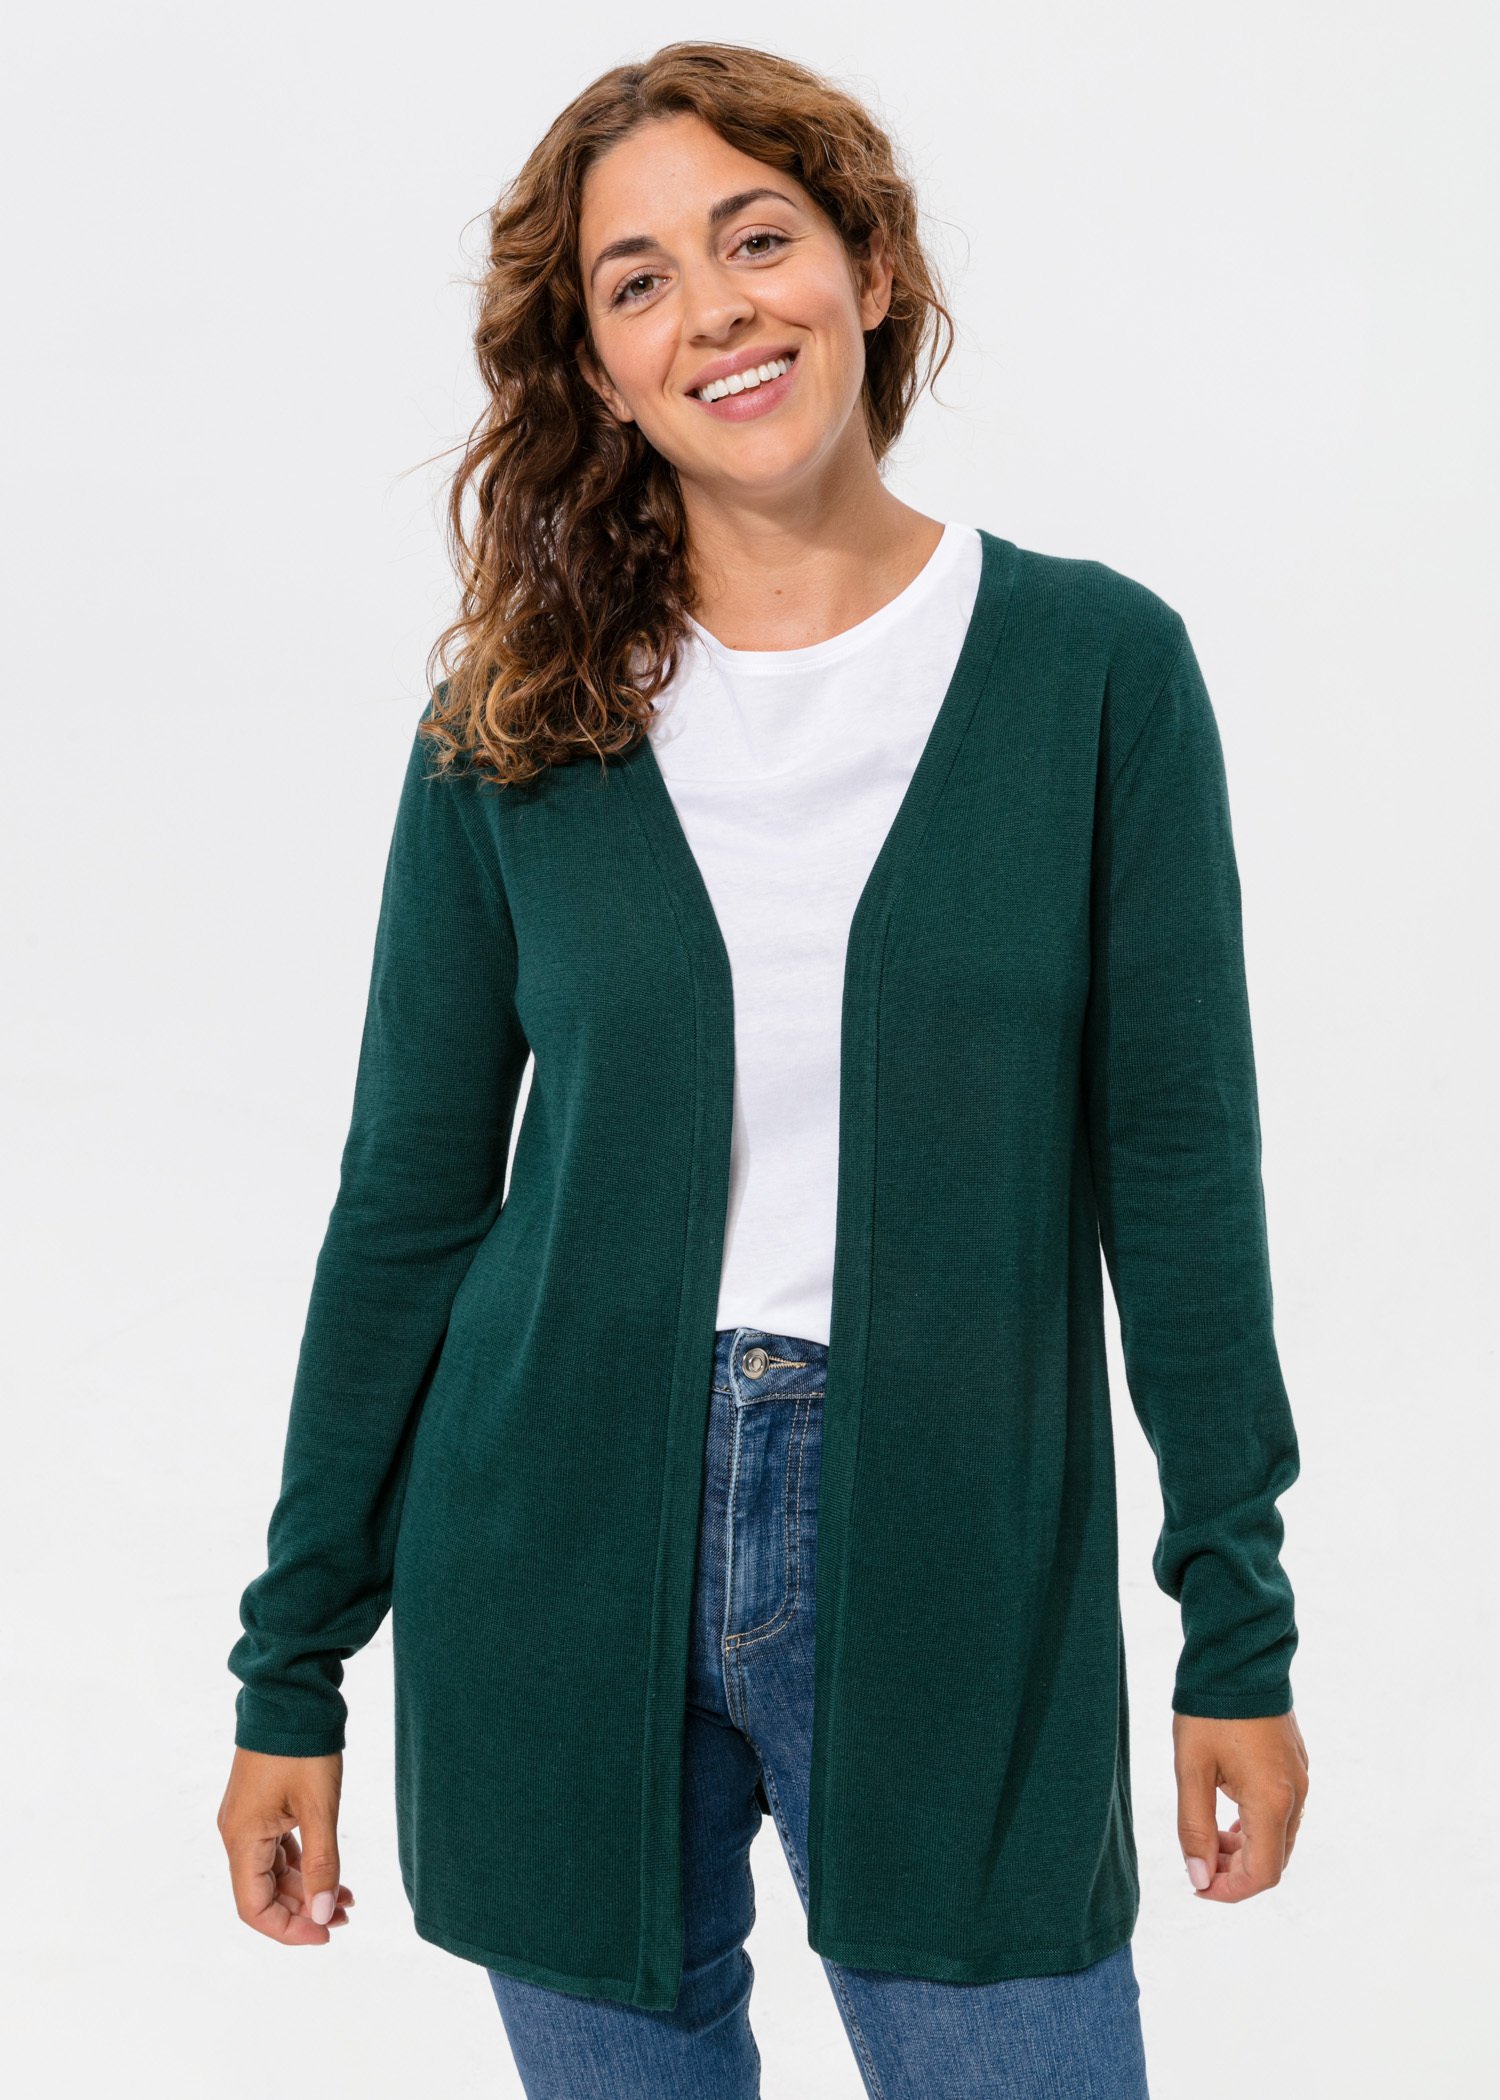 Solid long sleeved cardigan